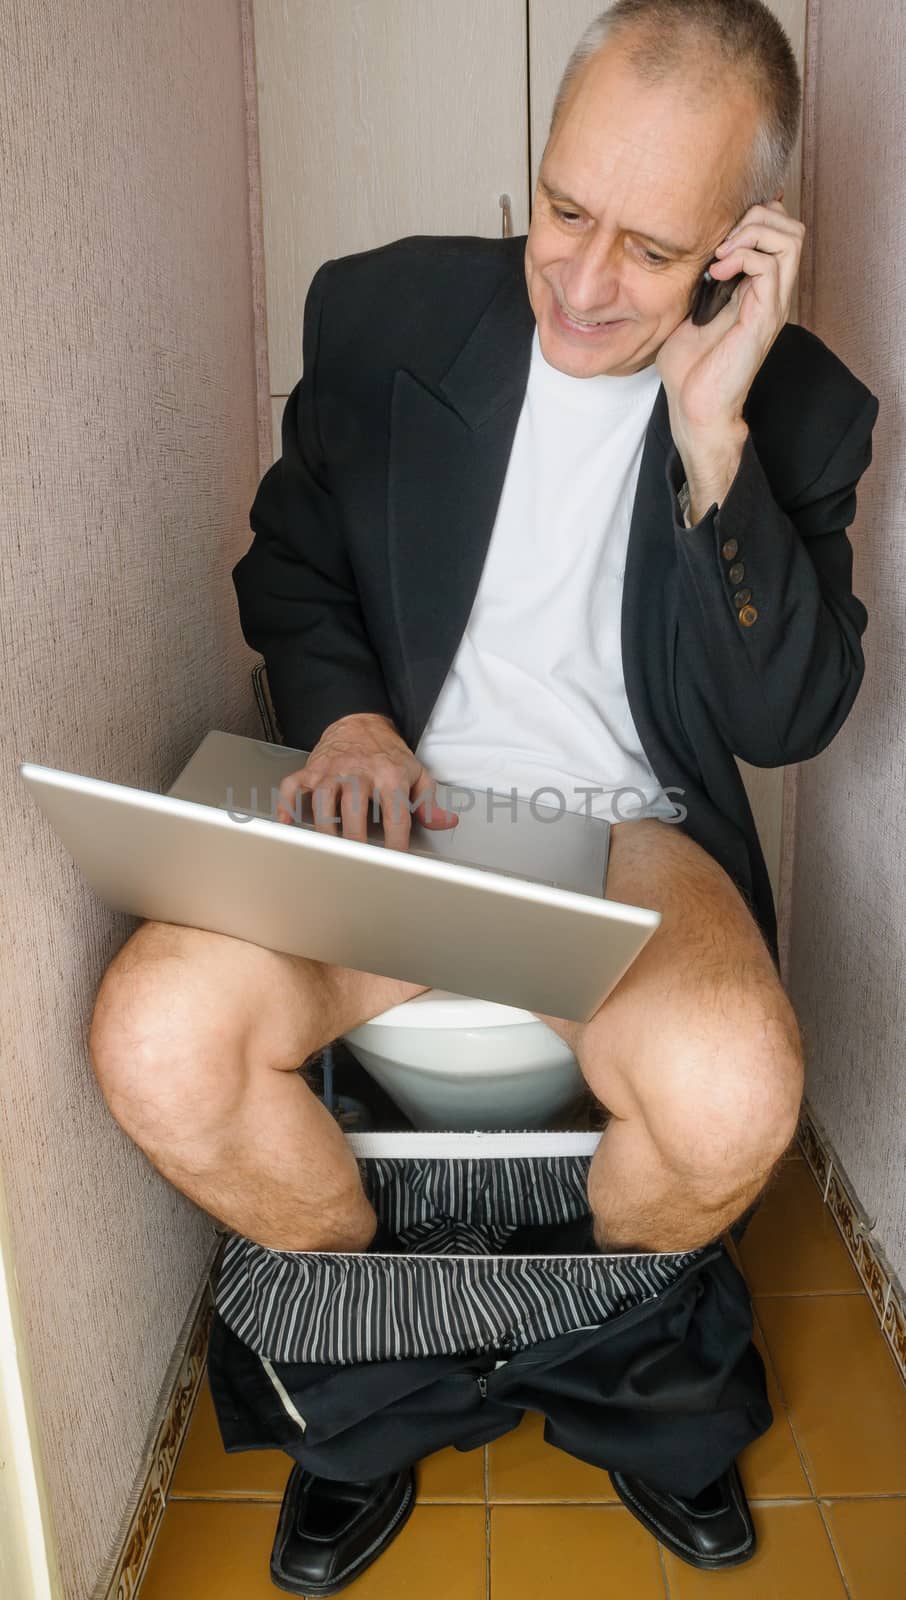 A workaholic adult businessman is using the computer laptop and the mobile phone, also called smartphone, while he is sitting on the bowl in the toilet